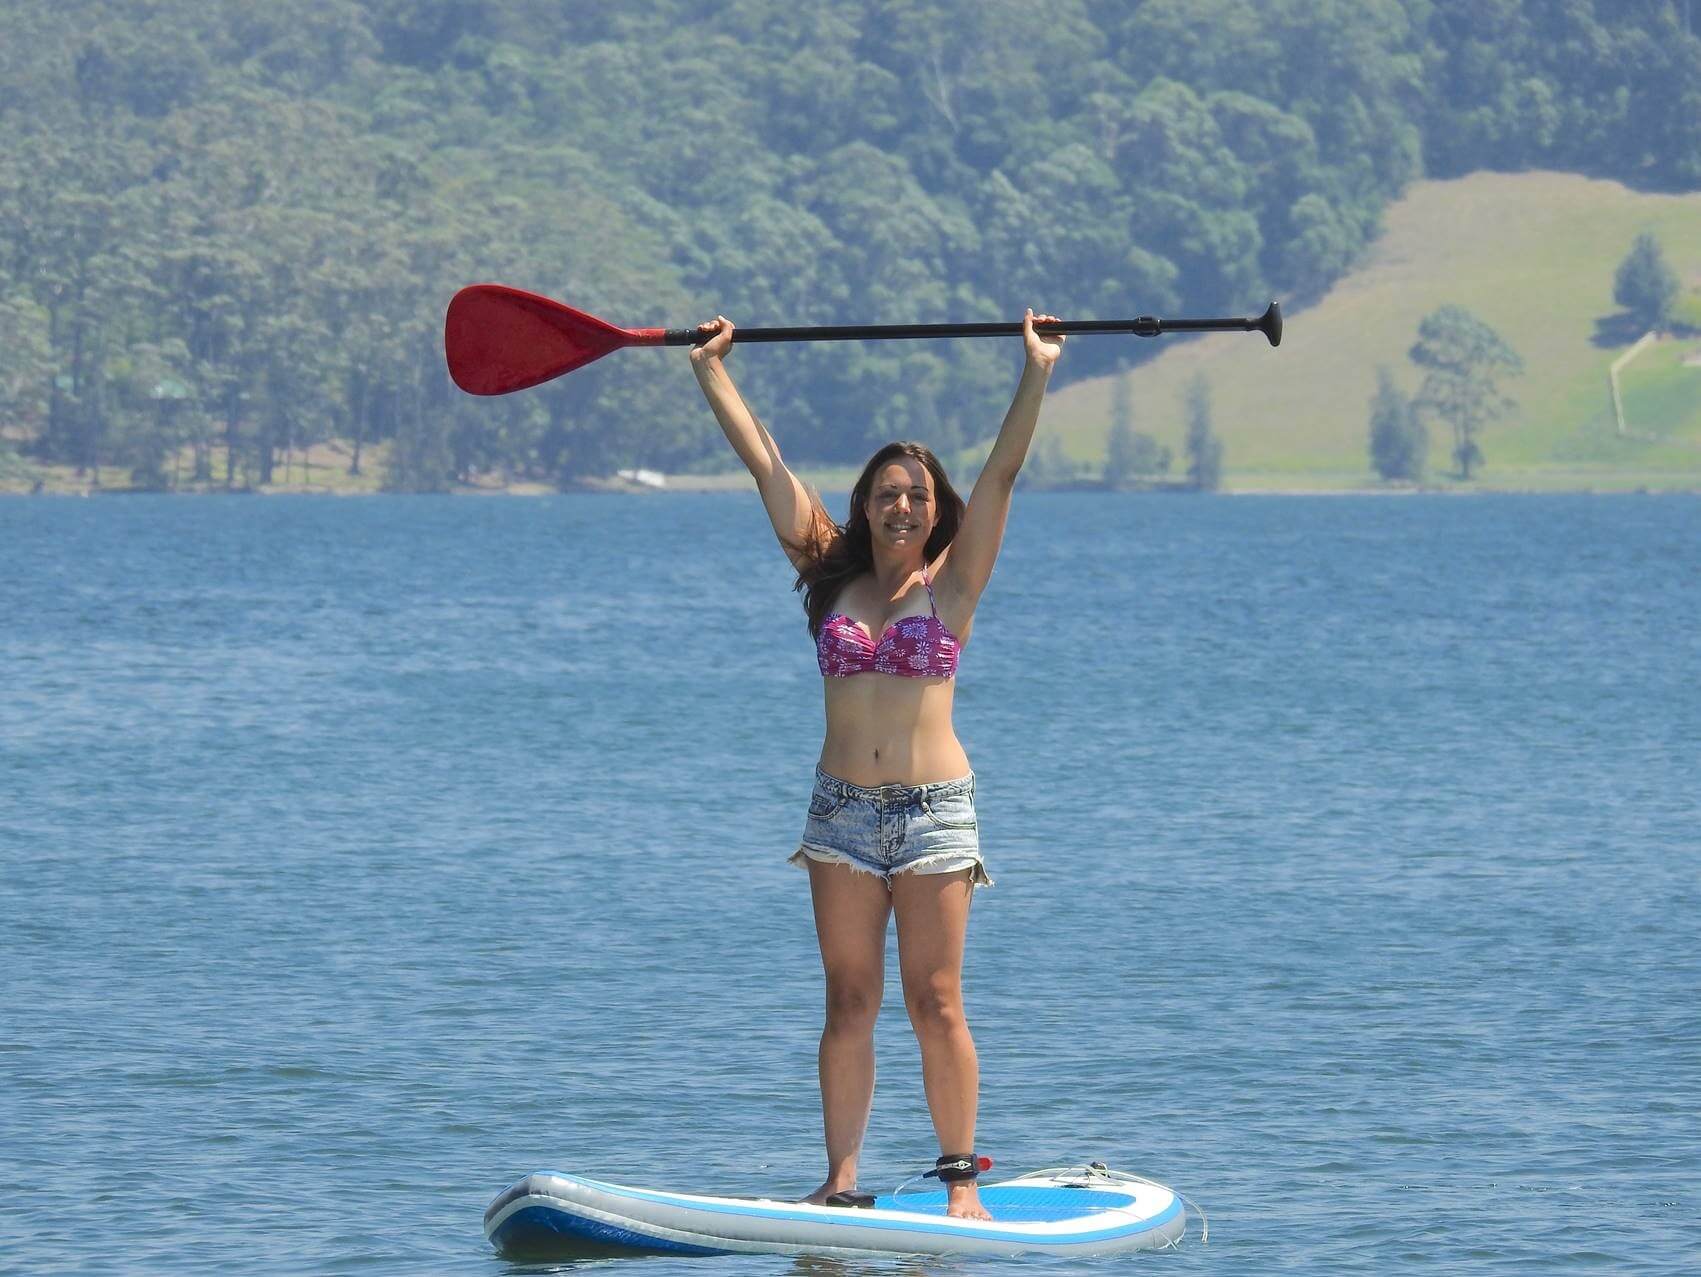 Women standing on paddle board on the water holding paddle with both hands above her head